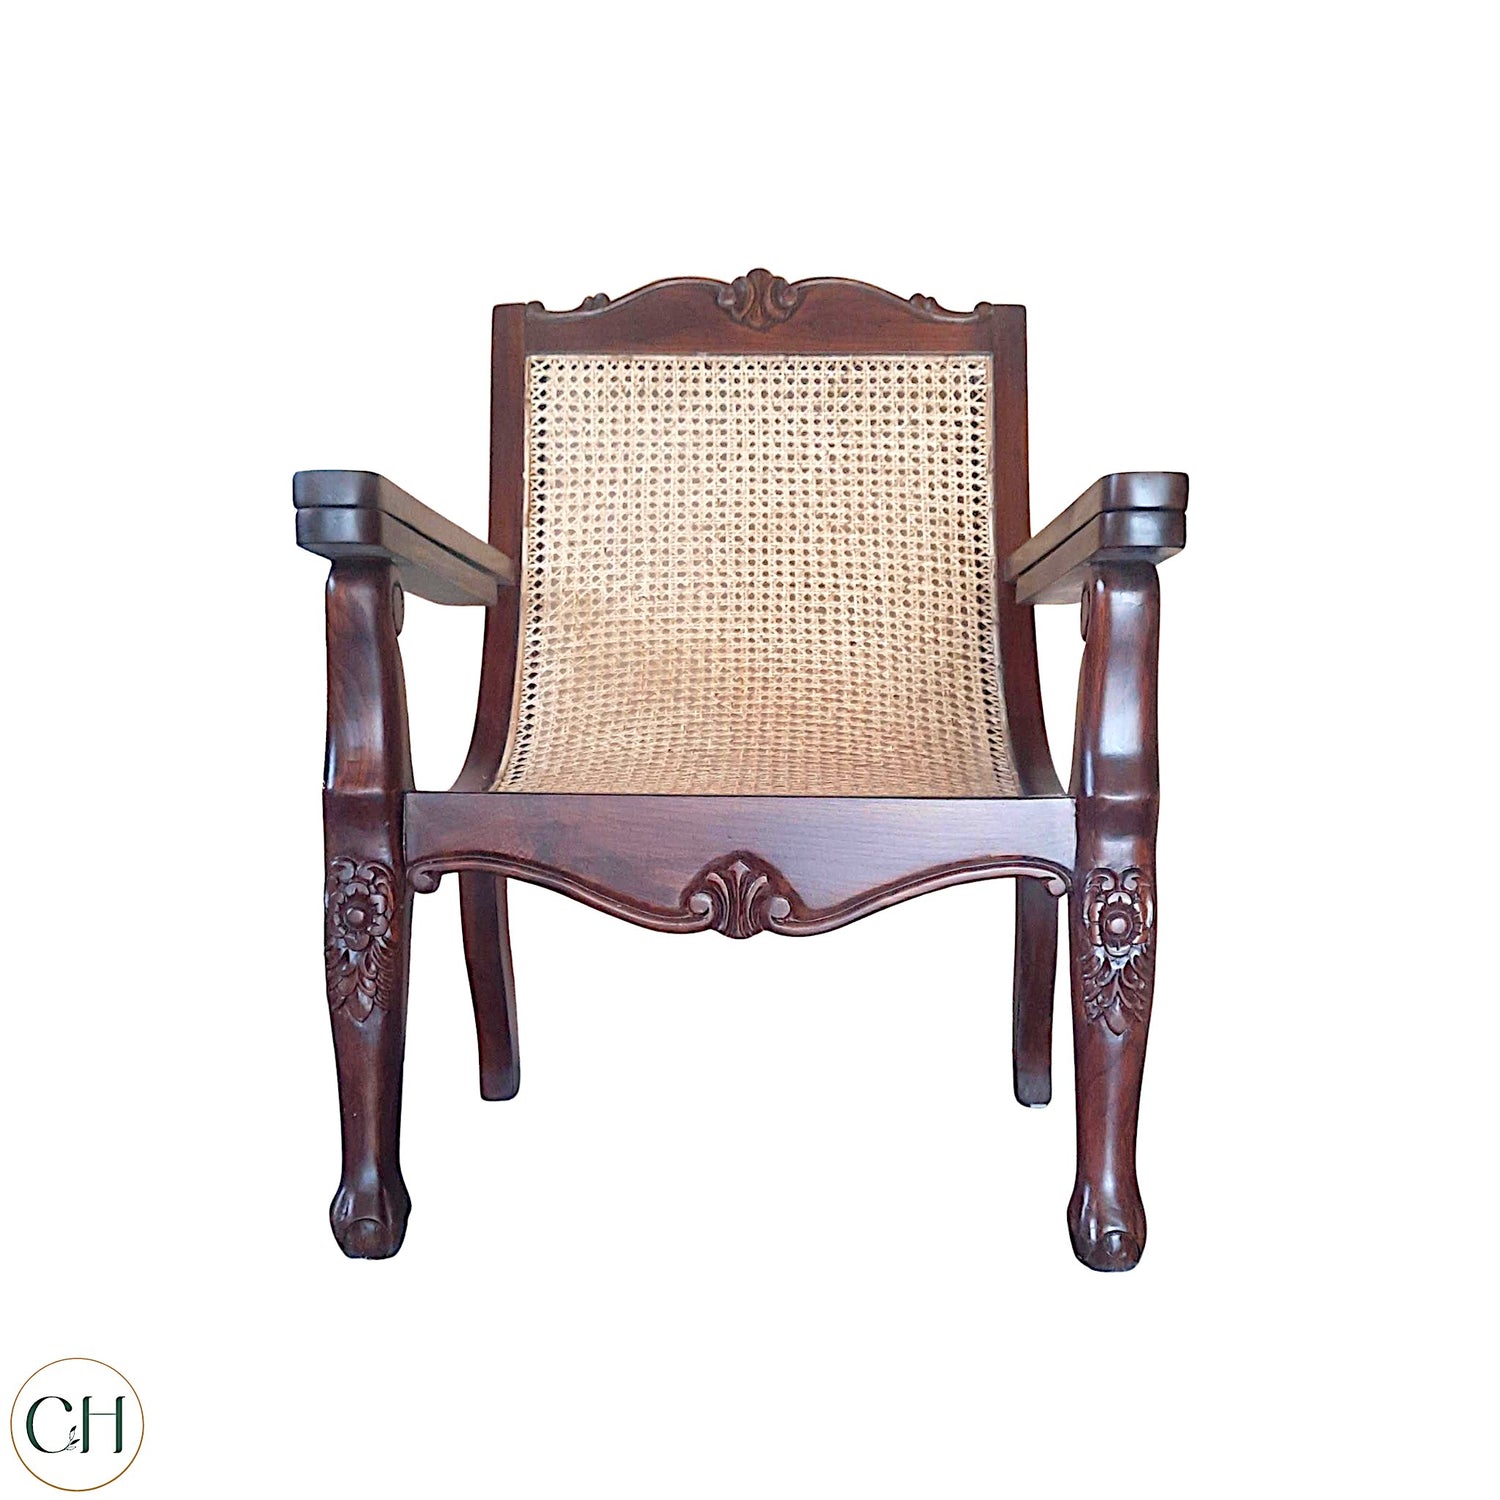 CustHum Planters Chair with seamless rattan seat, carving on legs and frame